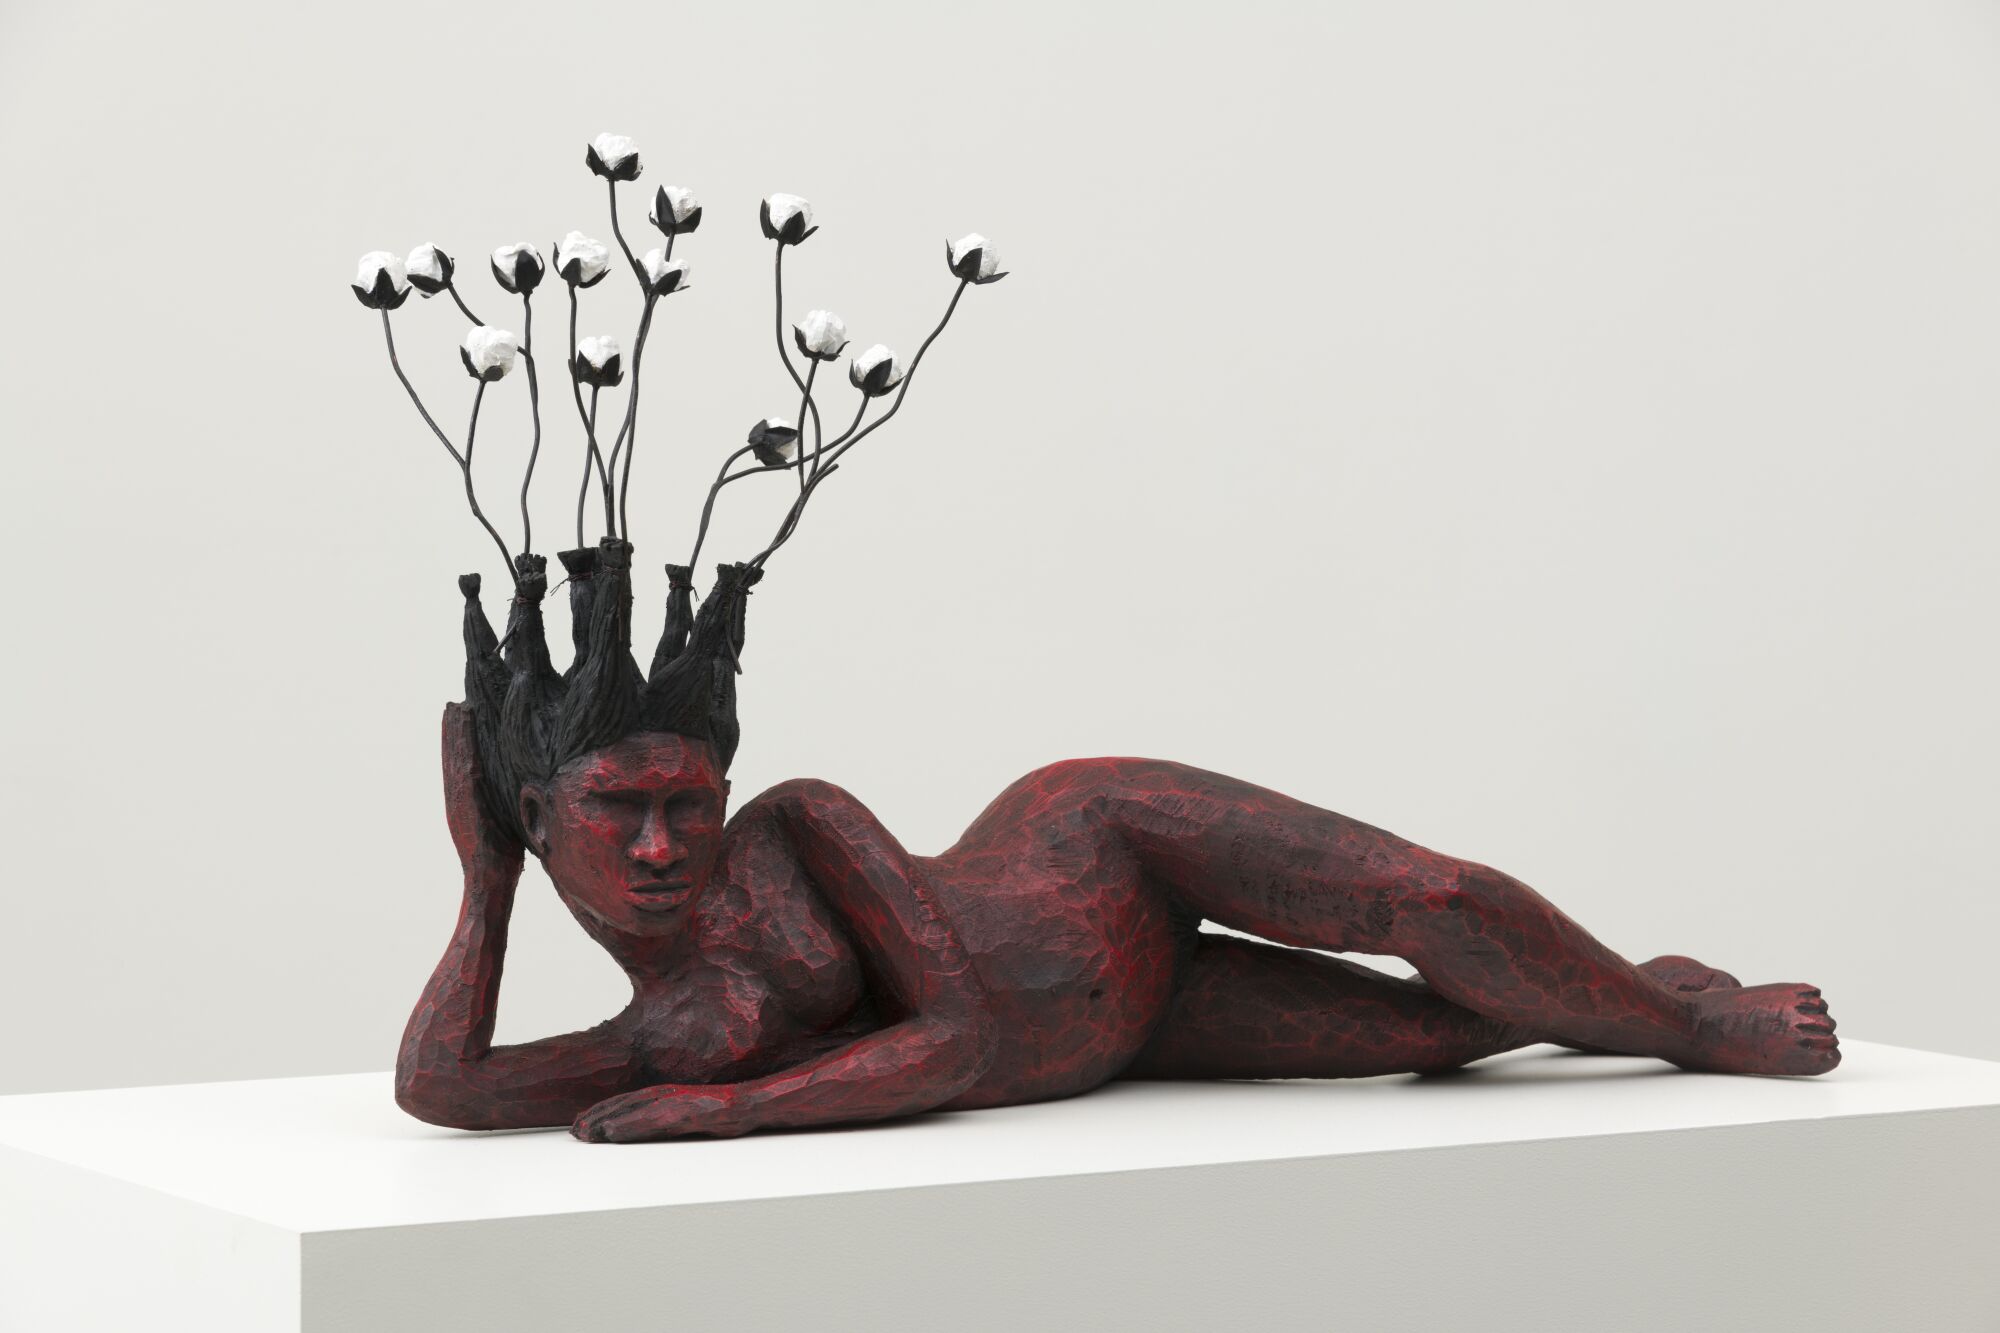 A reclining Black woman carved from wood sprouts cotton from her head